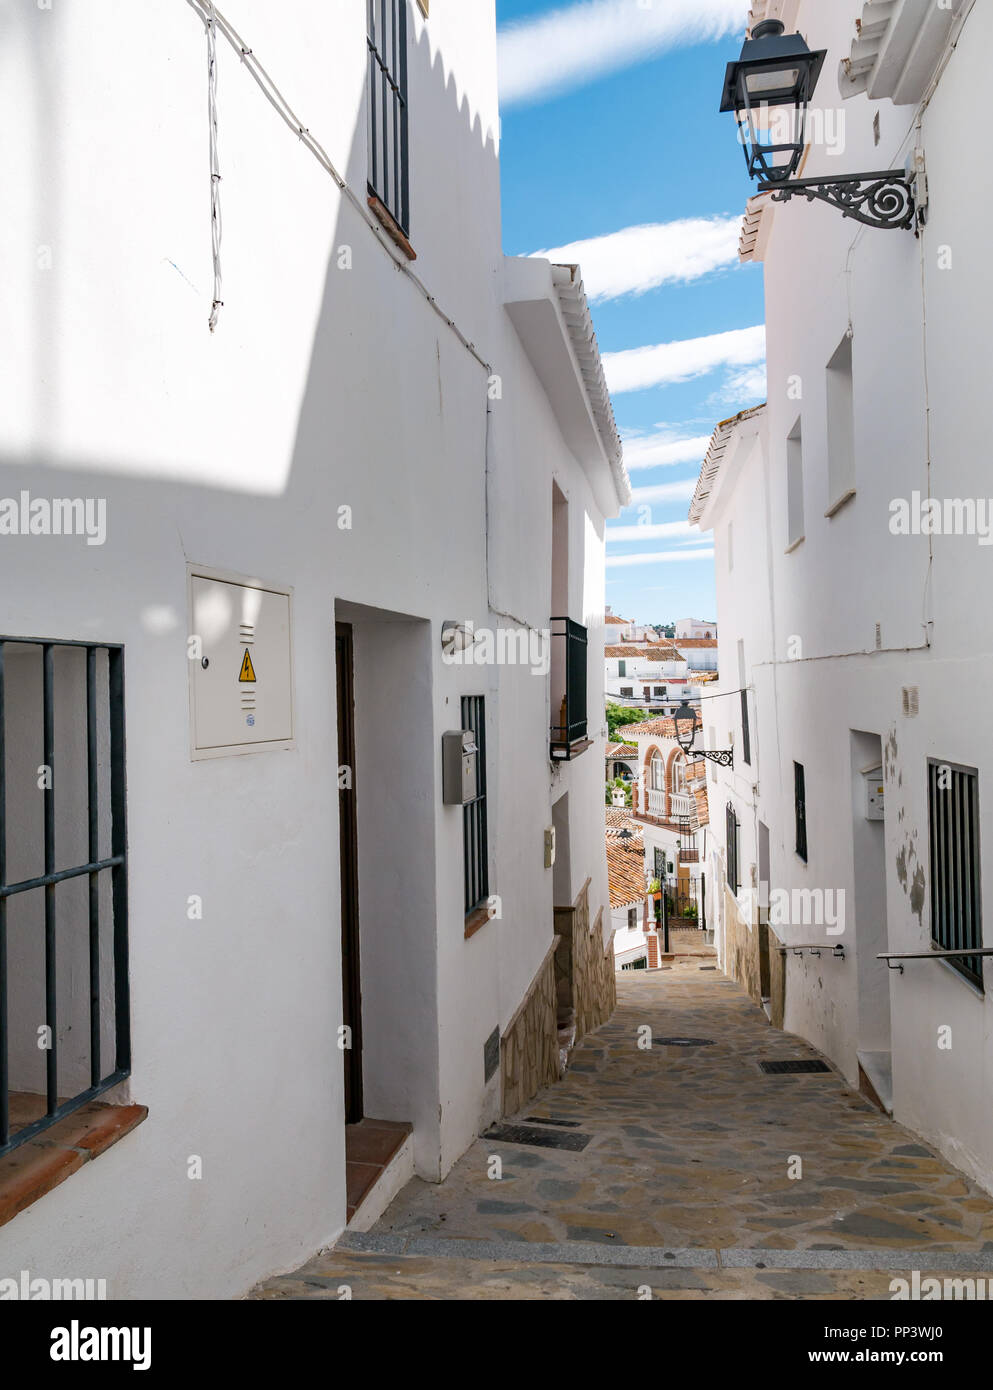 Picturesque narrow lane with traditional white houses, Sedella, Axarquia, Andalusia, Spain Stock Photo